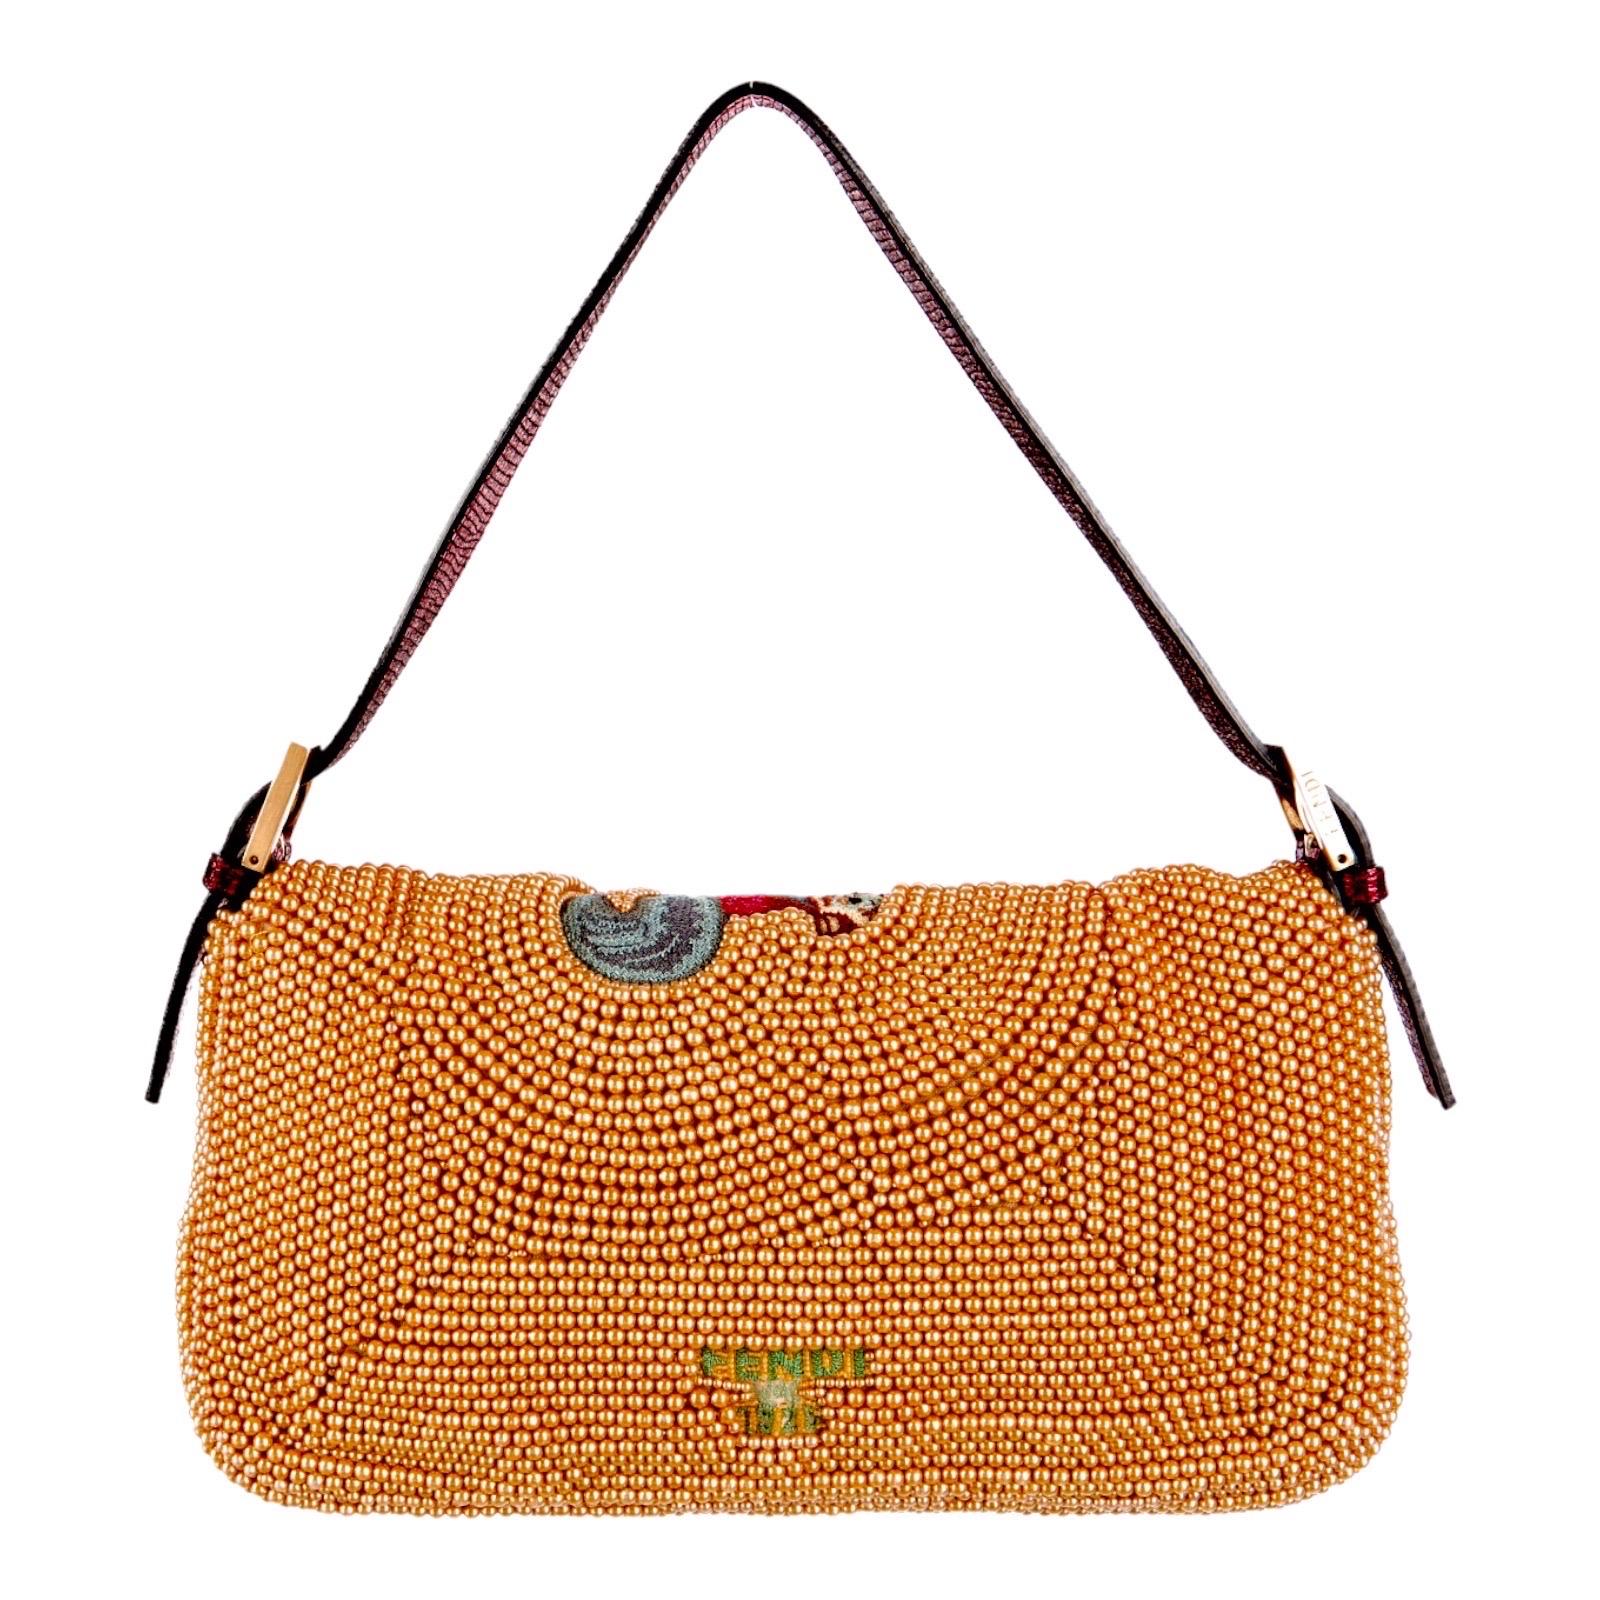 Special Piece, ultrarare collector's Baguette bag by FENDI

Golden bead-embellished bag
Hand-embroidery on top and back
